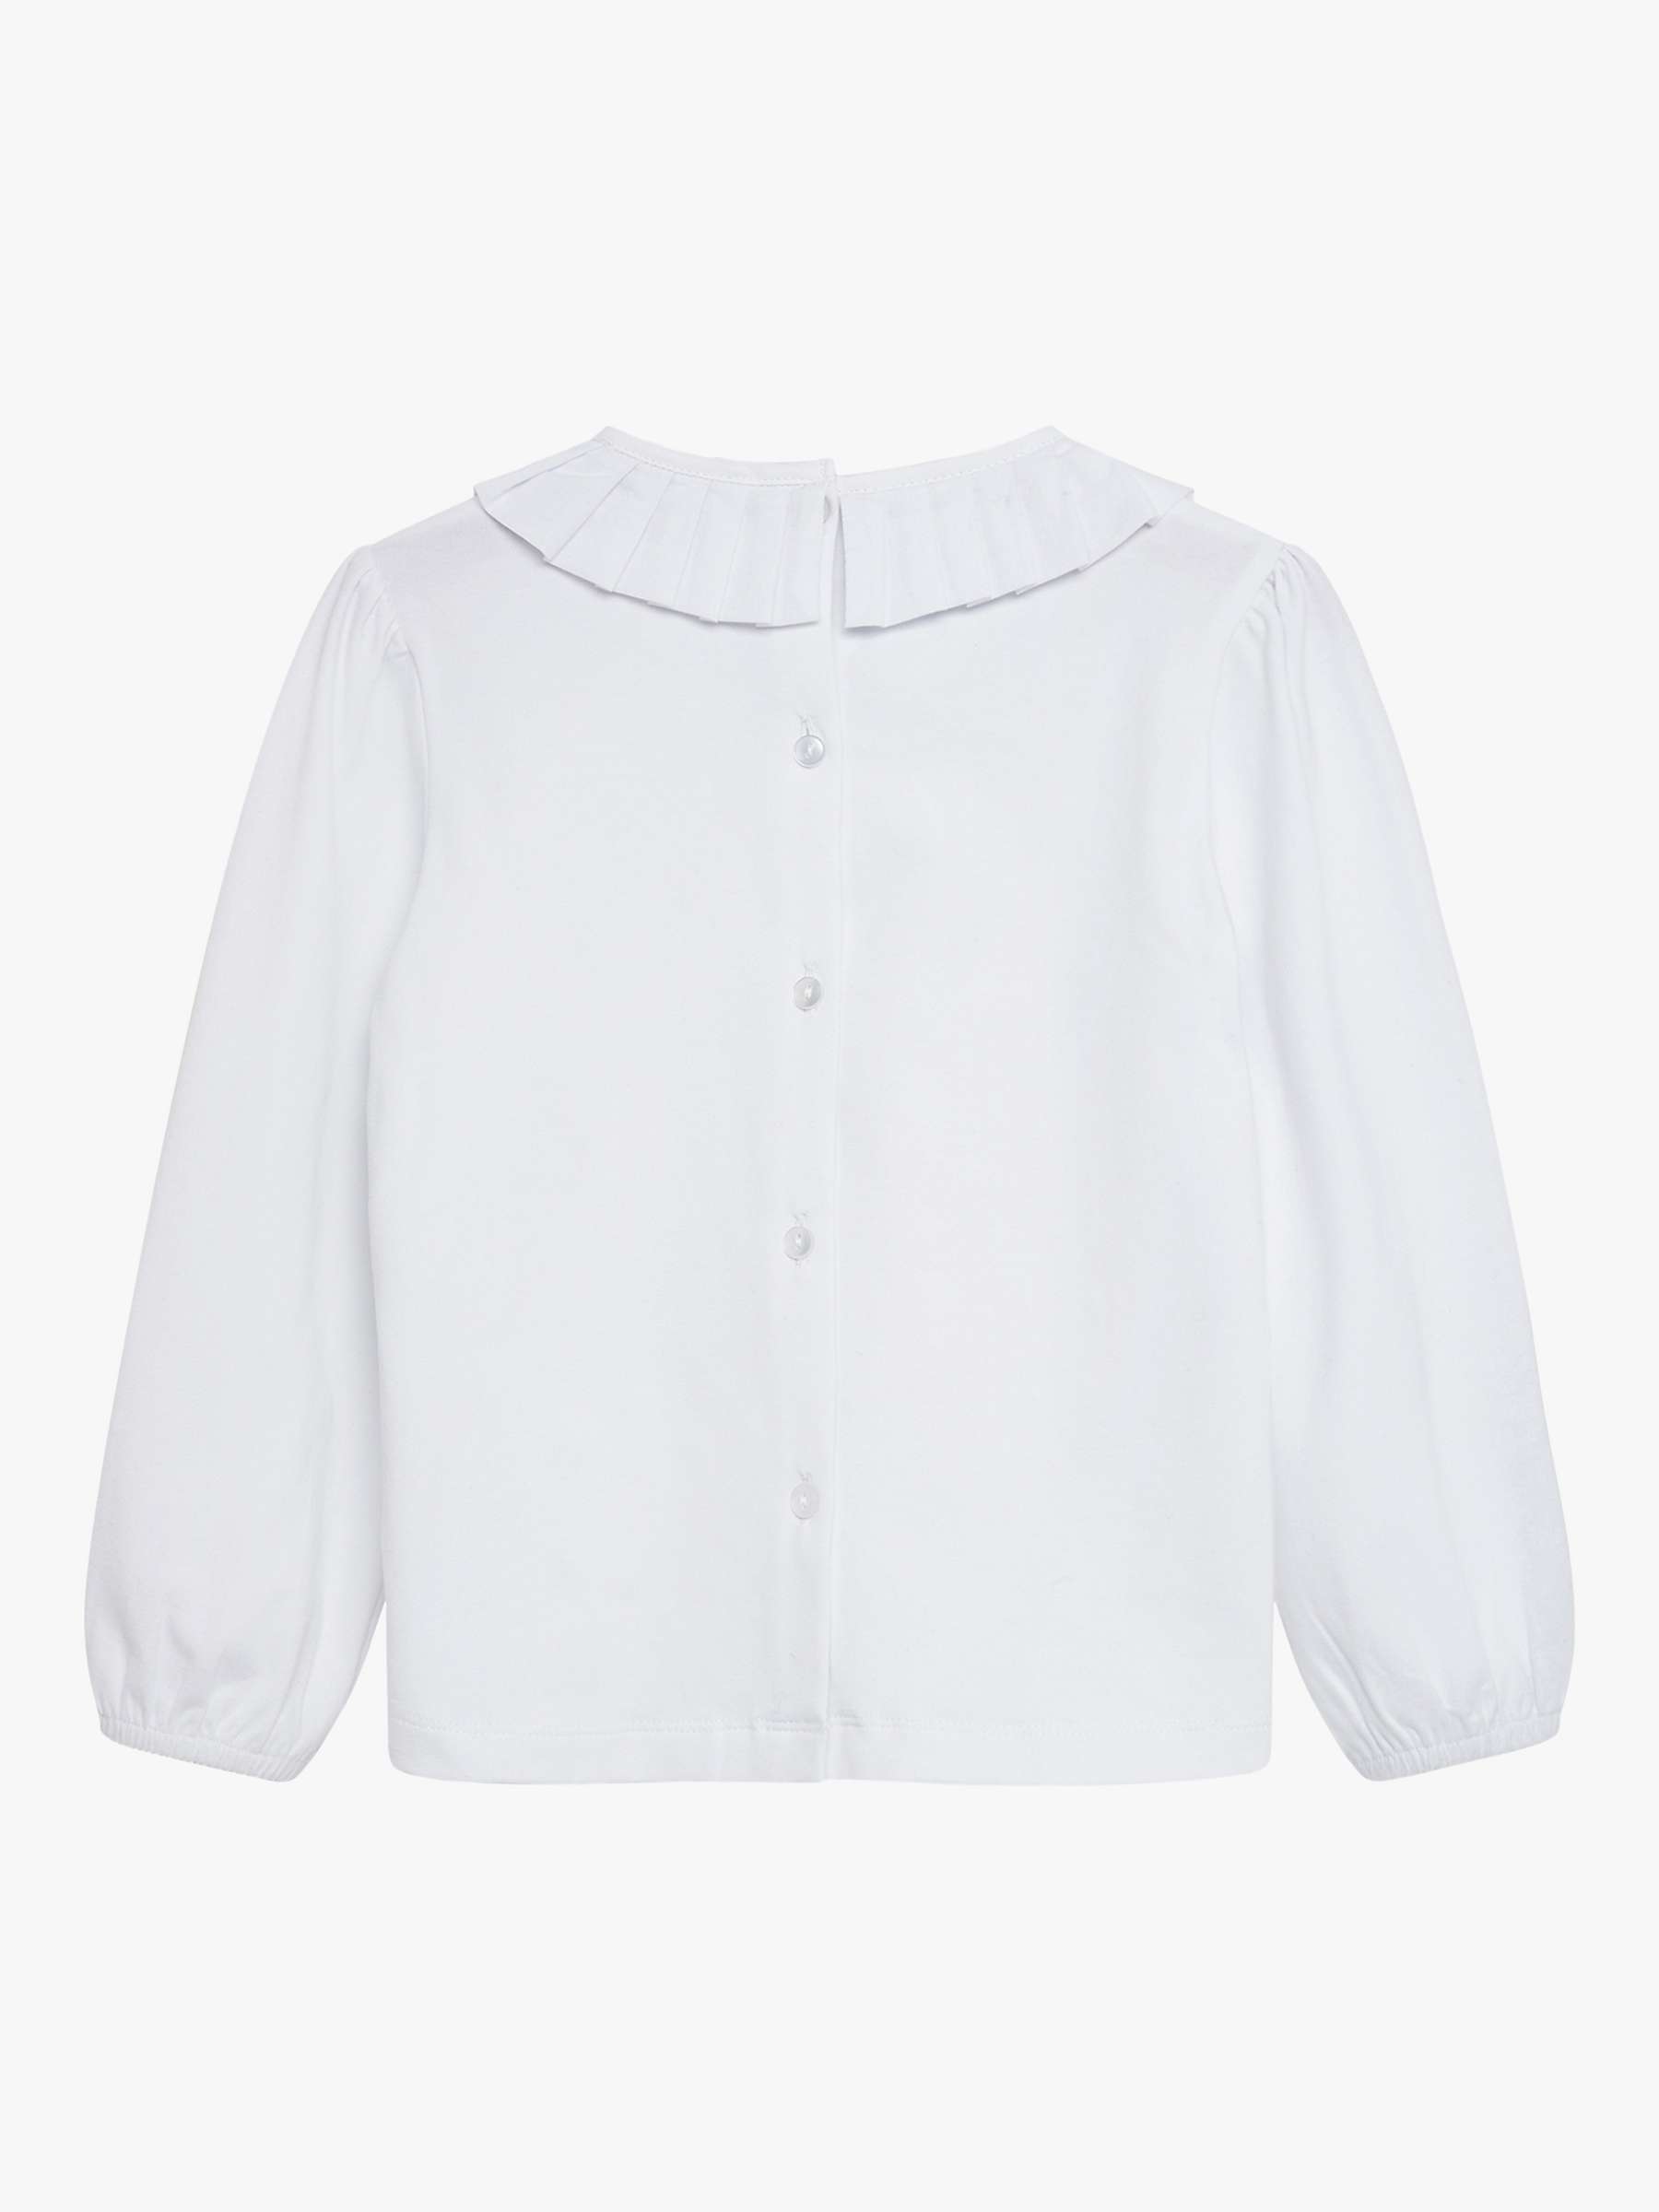 Buy Trotters Kids' Lottie Pleated Collar Jersey Blouse, White Online at johnlewis.com